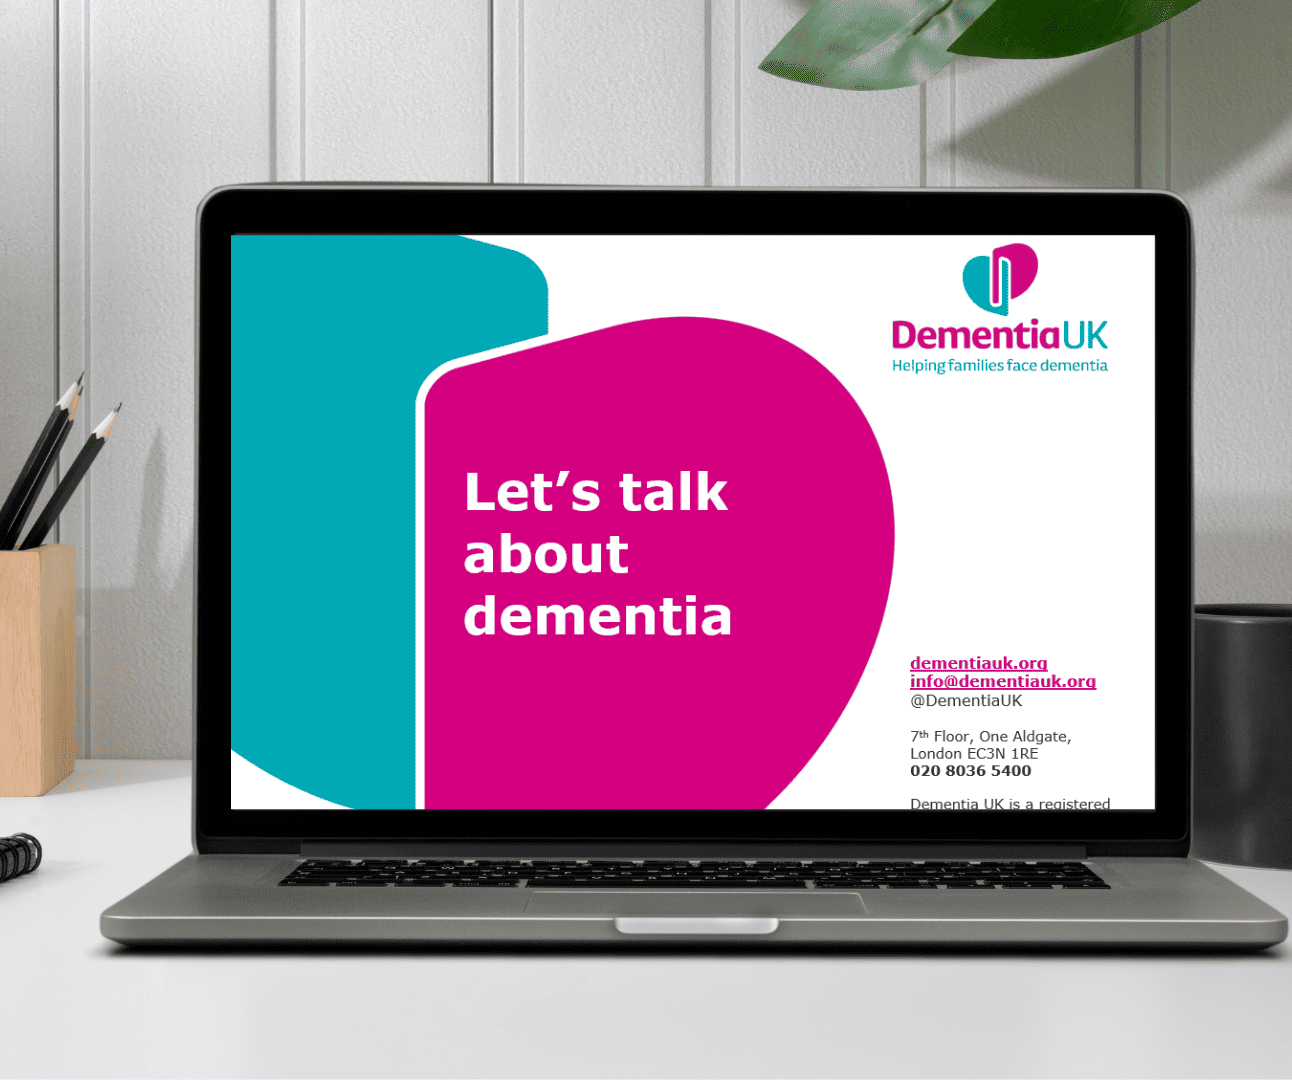 Let's talk about dementia presentation on a computer at a desk